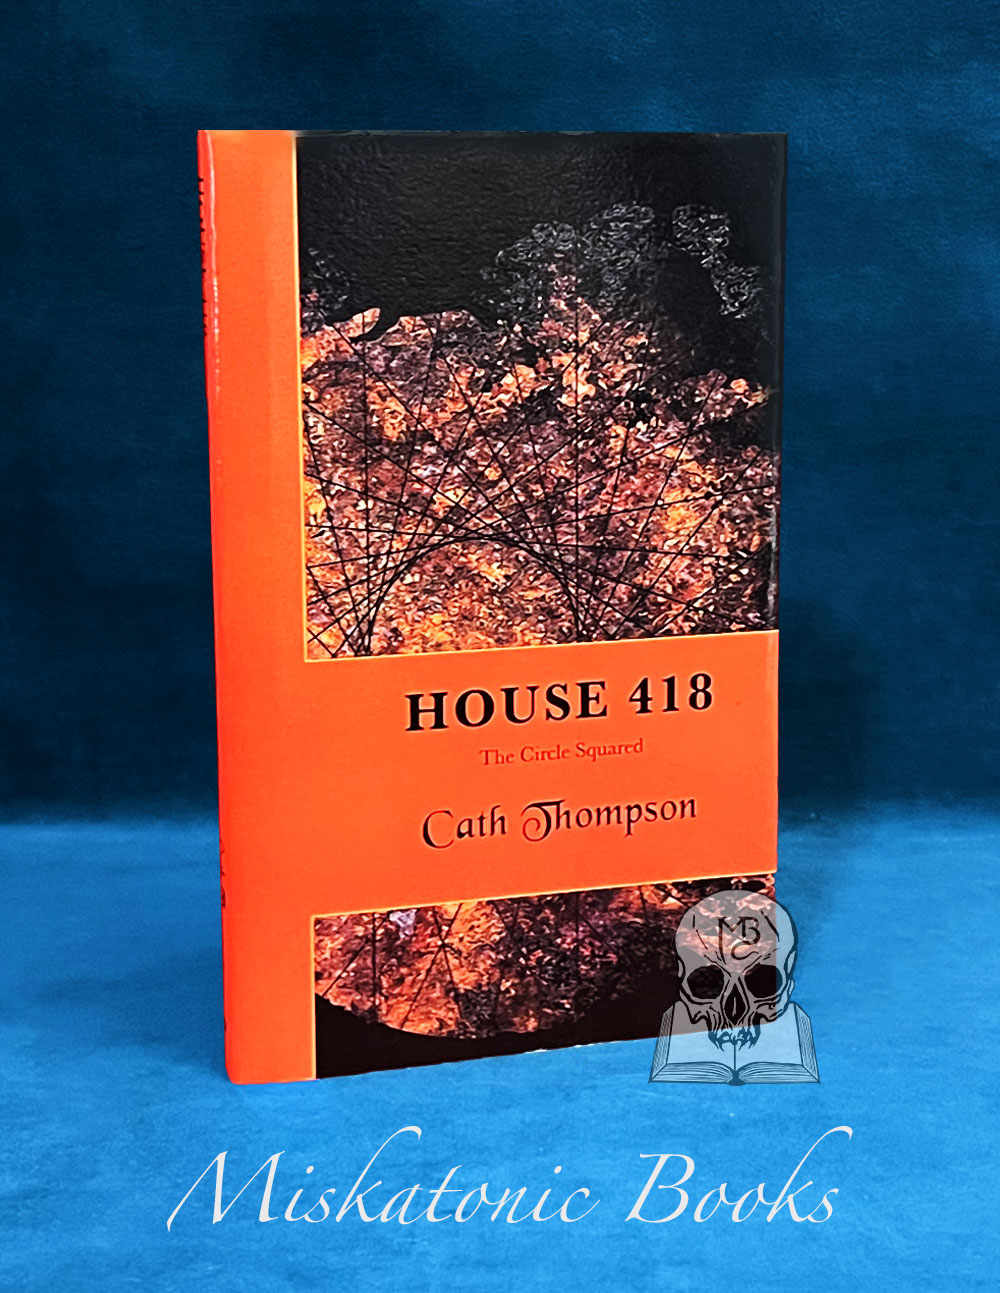 HOUSE 418: The Circle Squared by Cath Thompson - Hardcover Edition